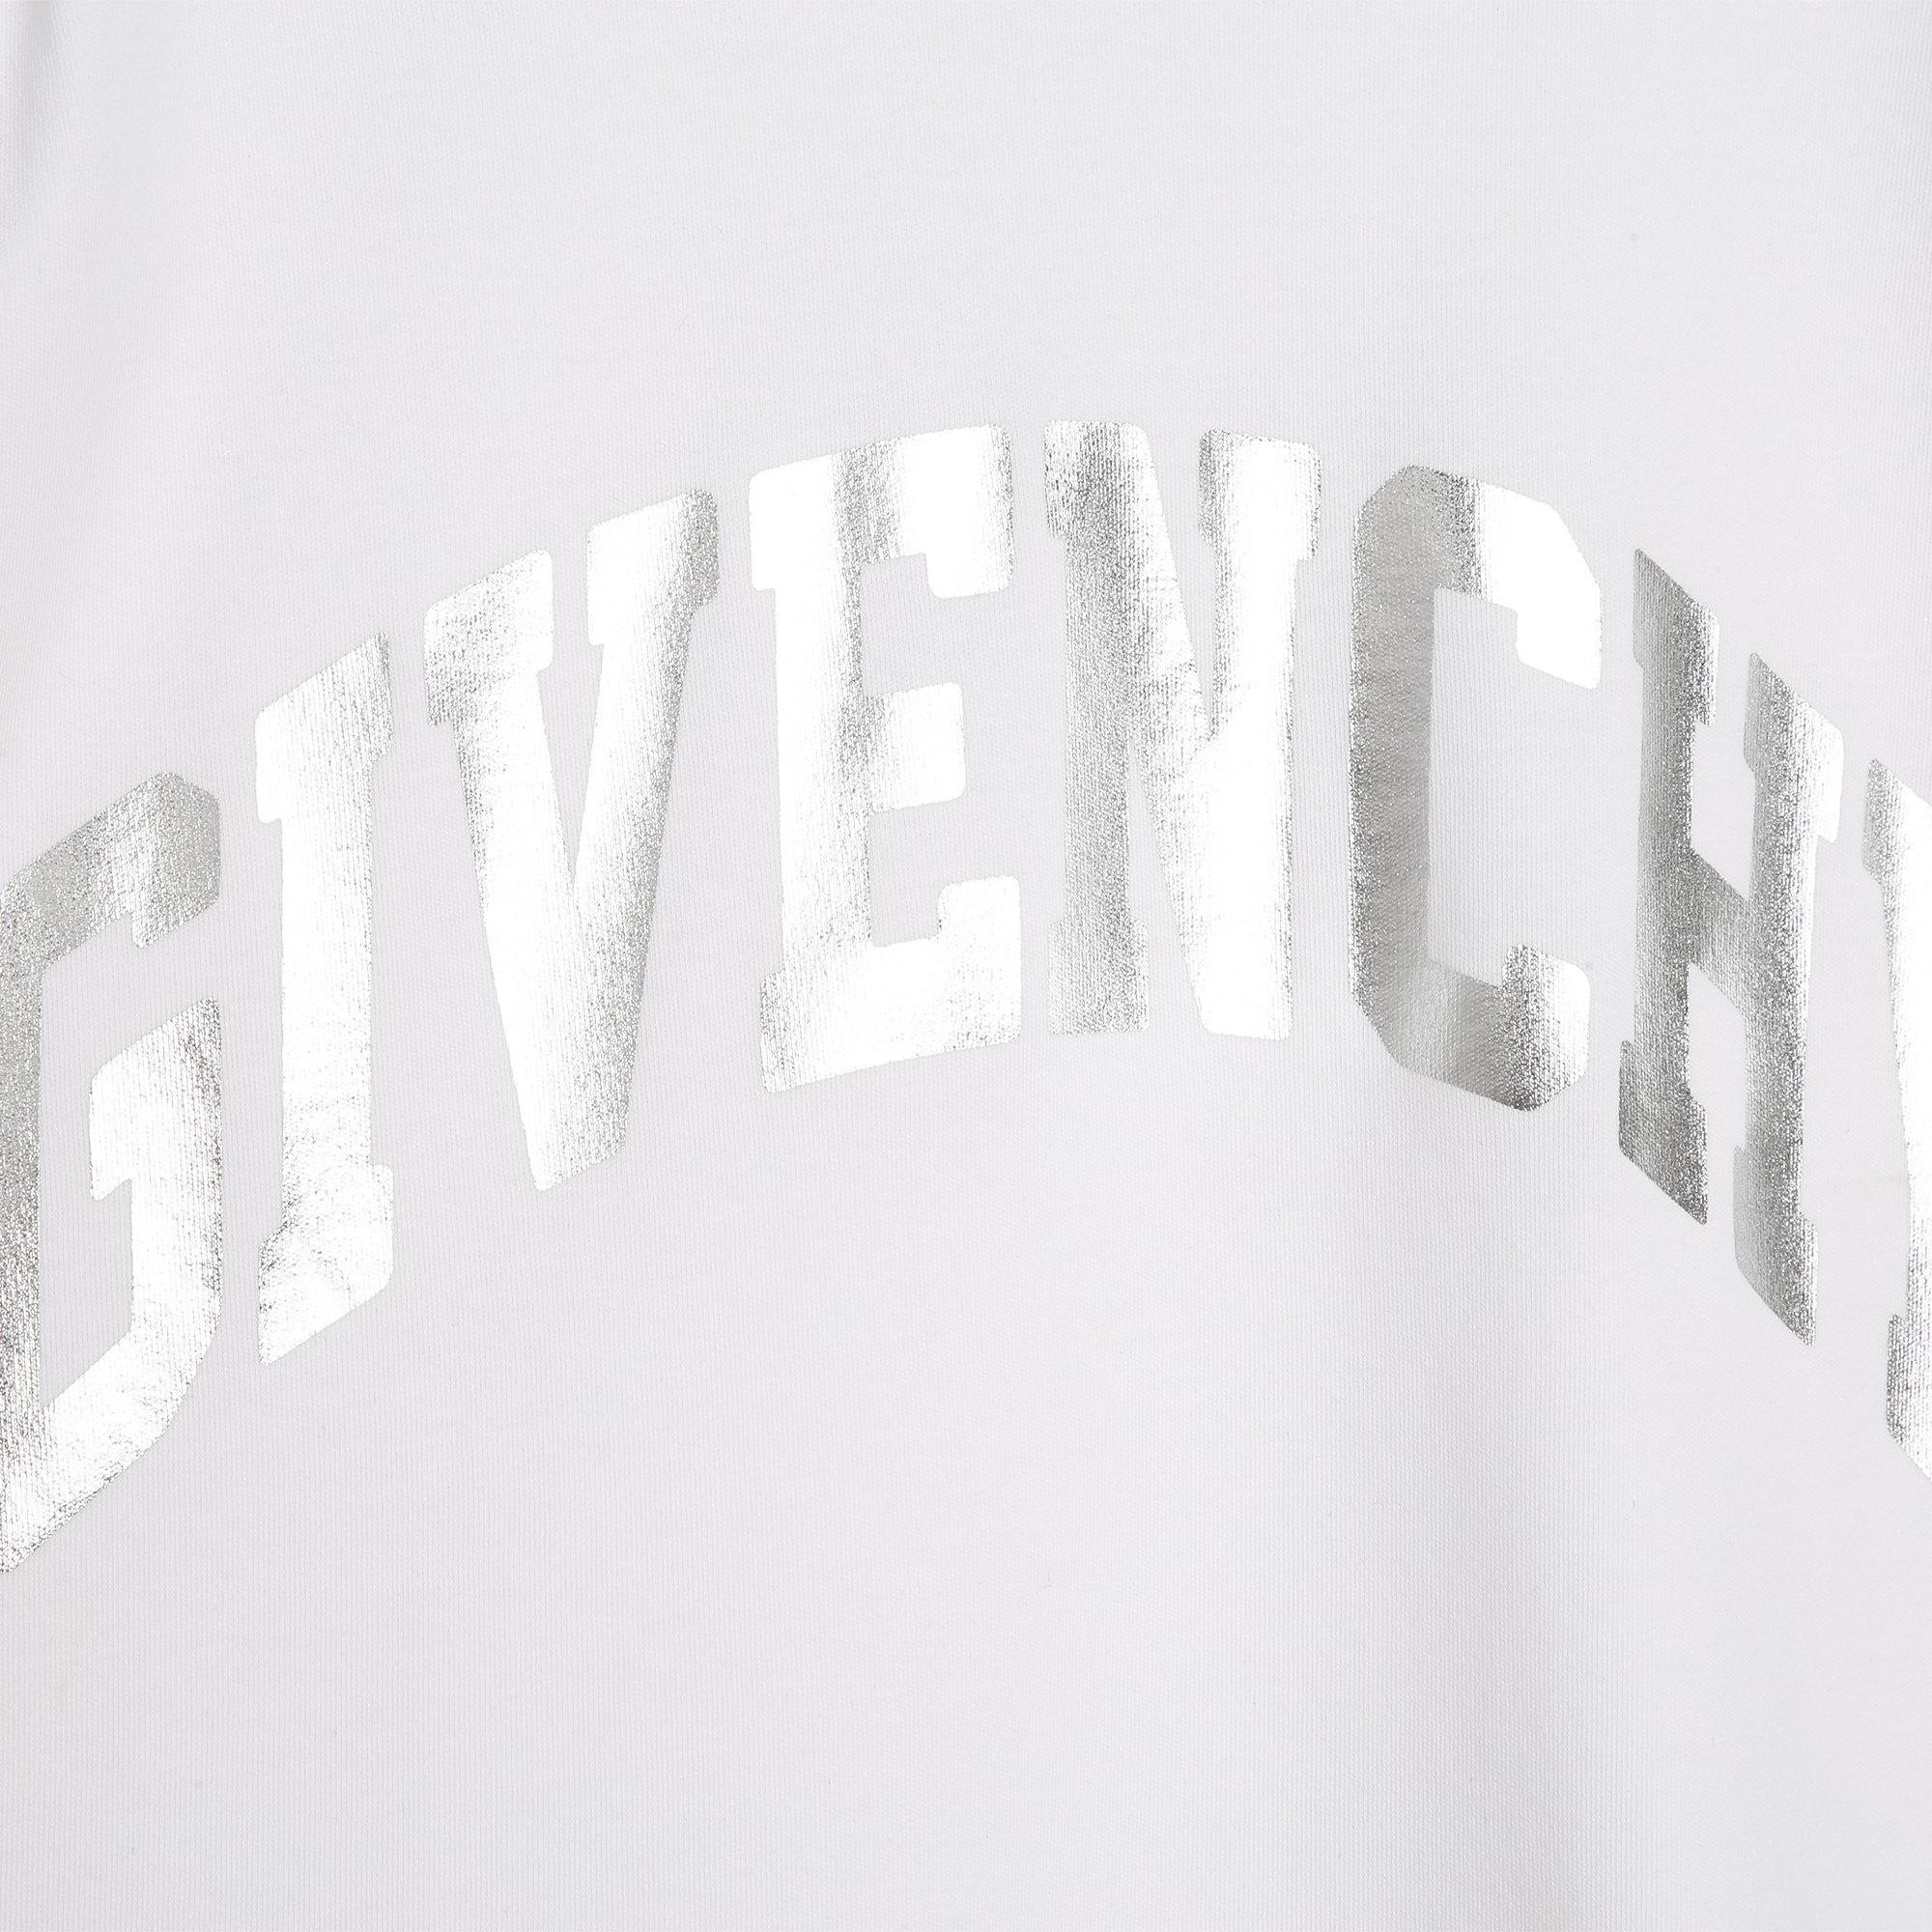 Cotton T-shirt with pleats GIVENCHY for GIRL